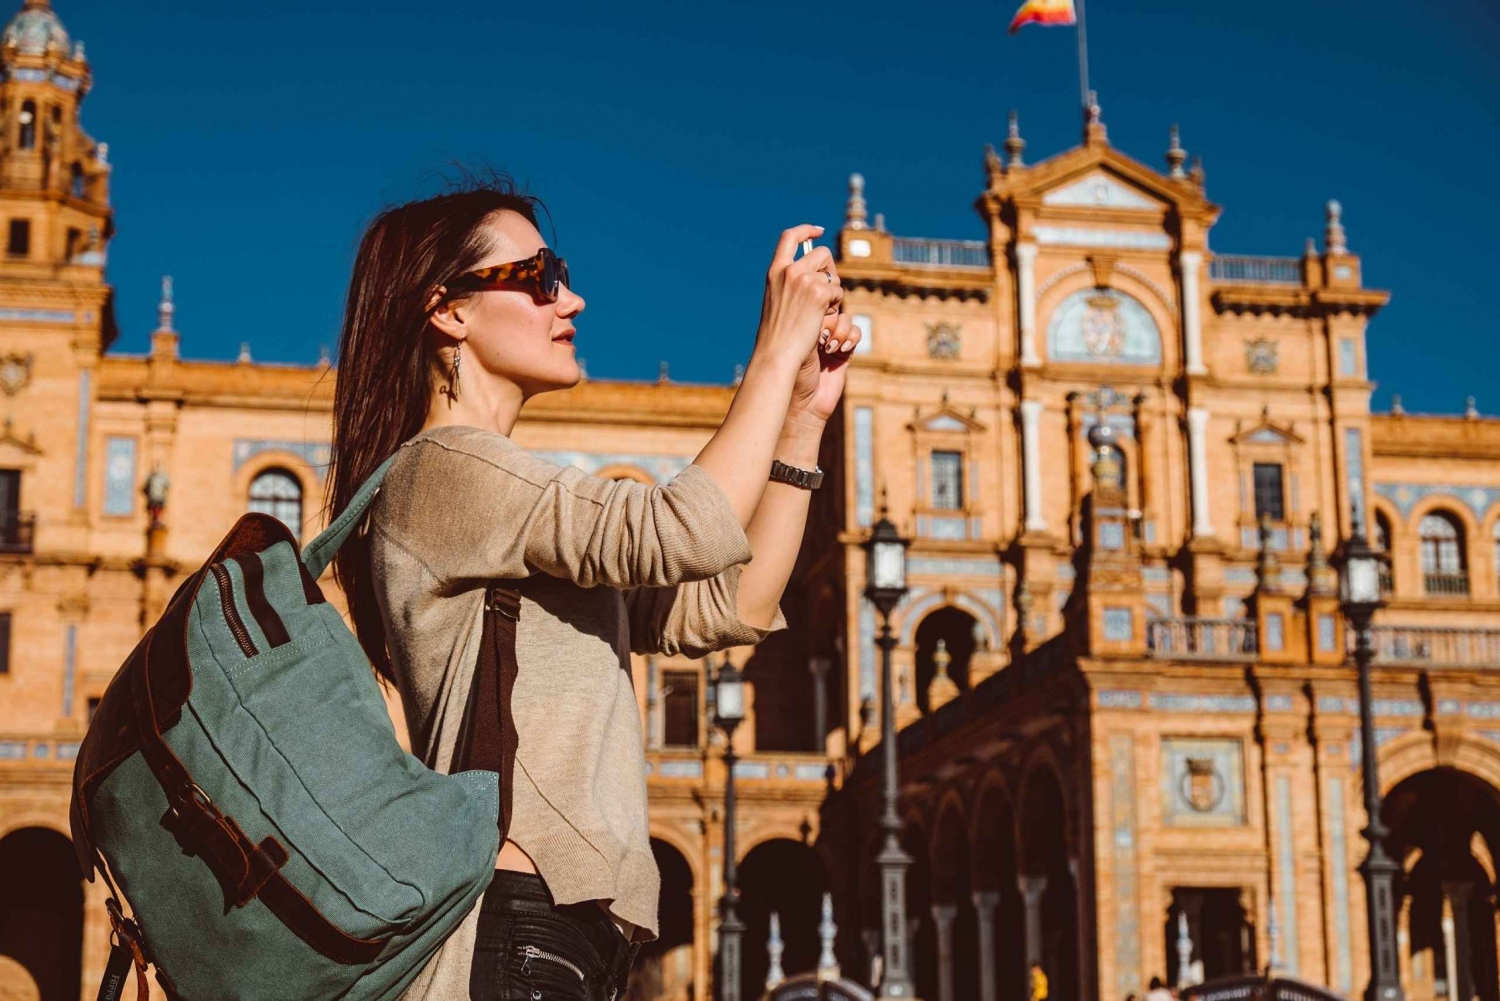 Full-Day Tour of Seville from Costa del Sol